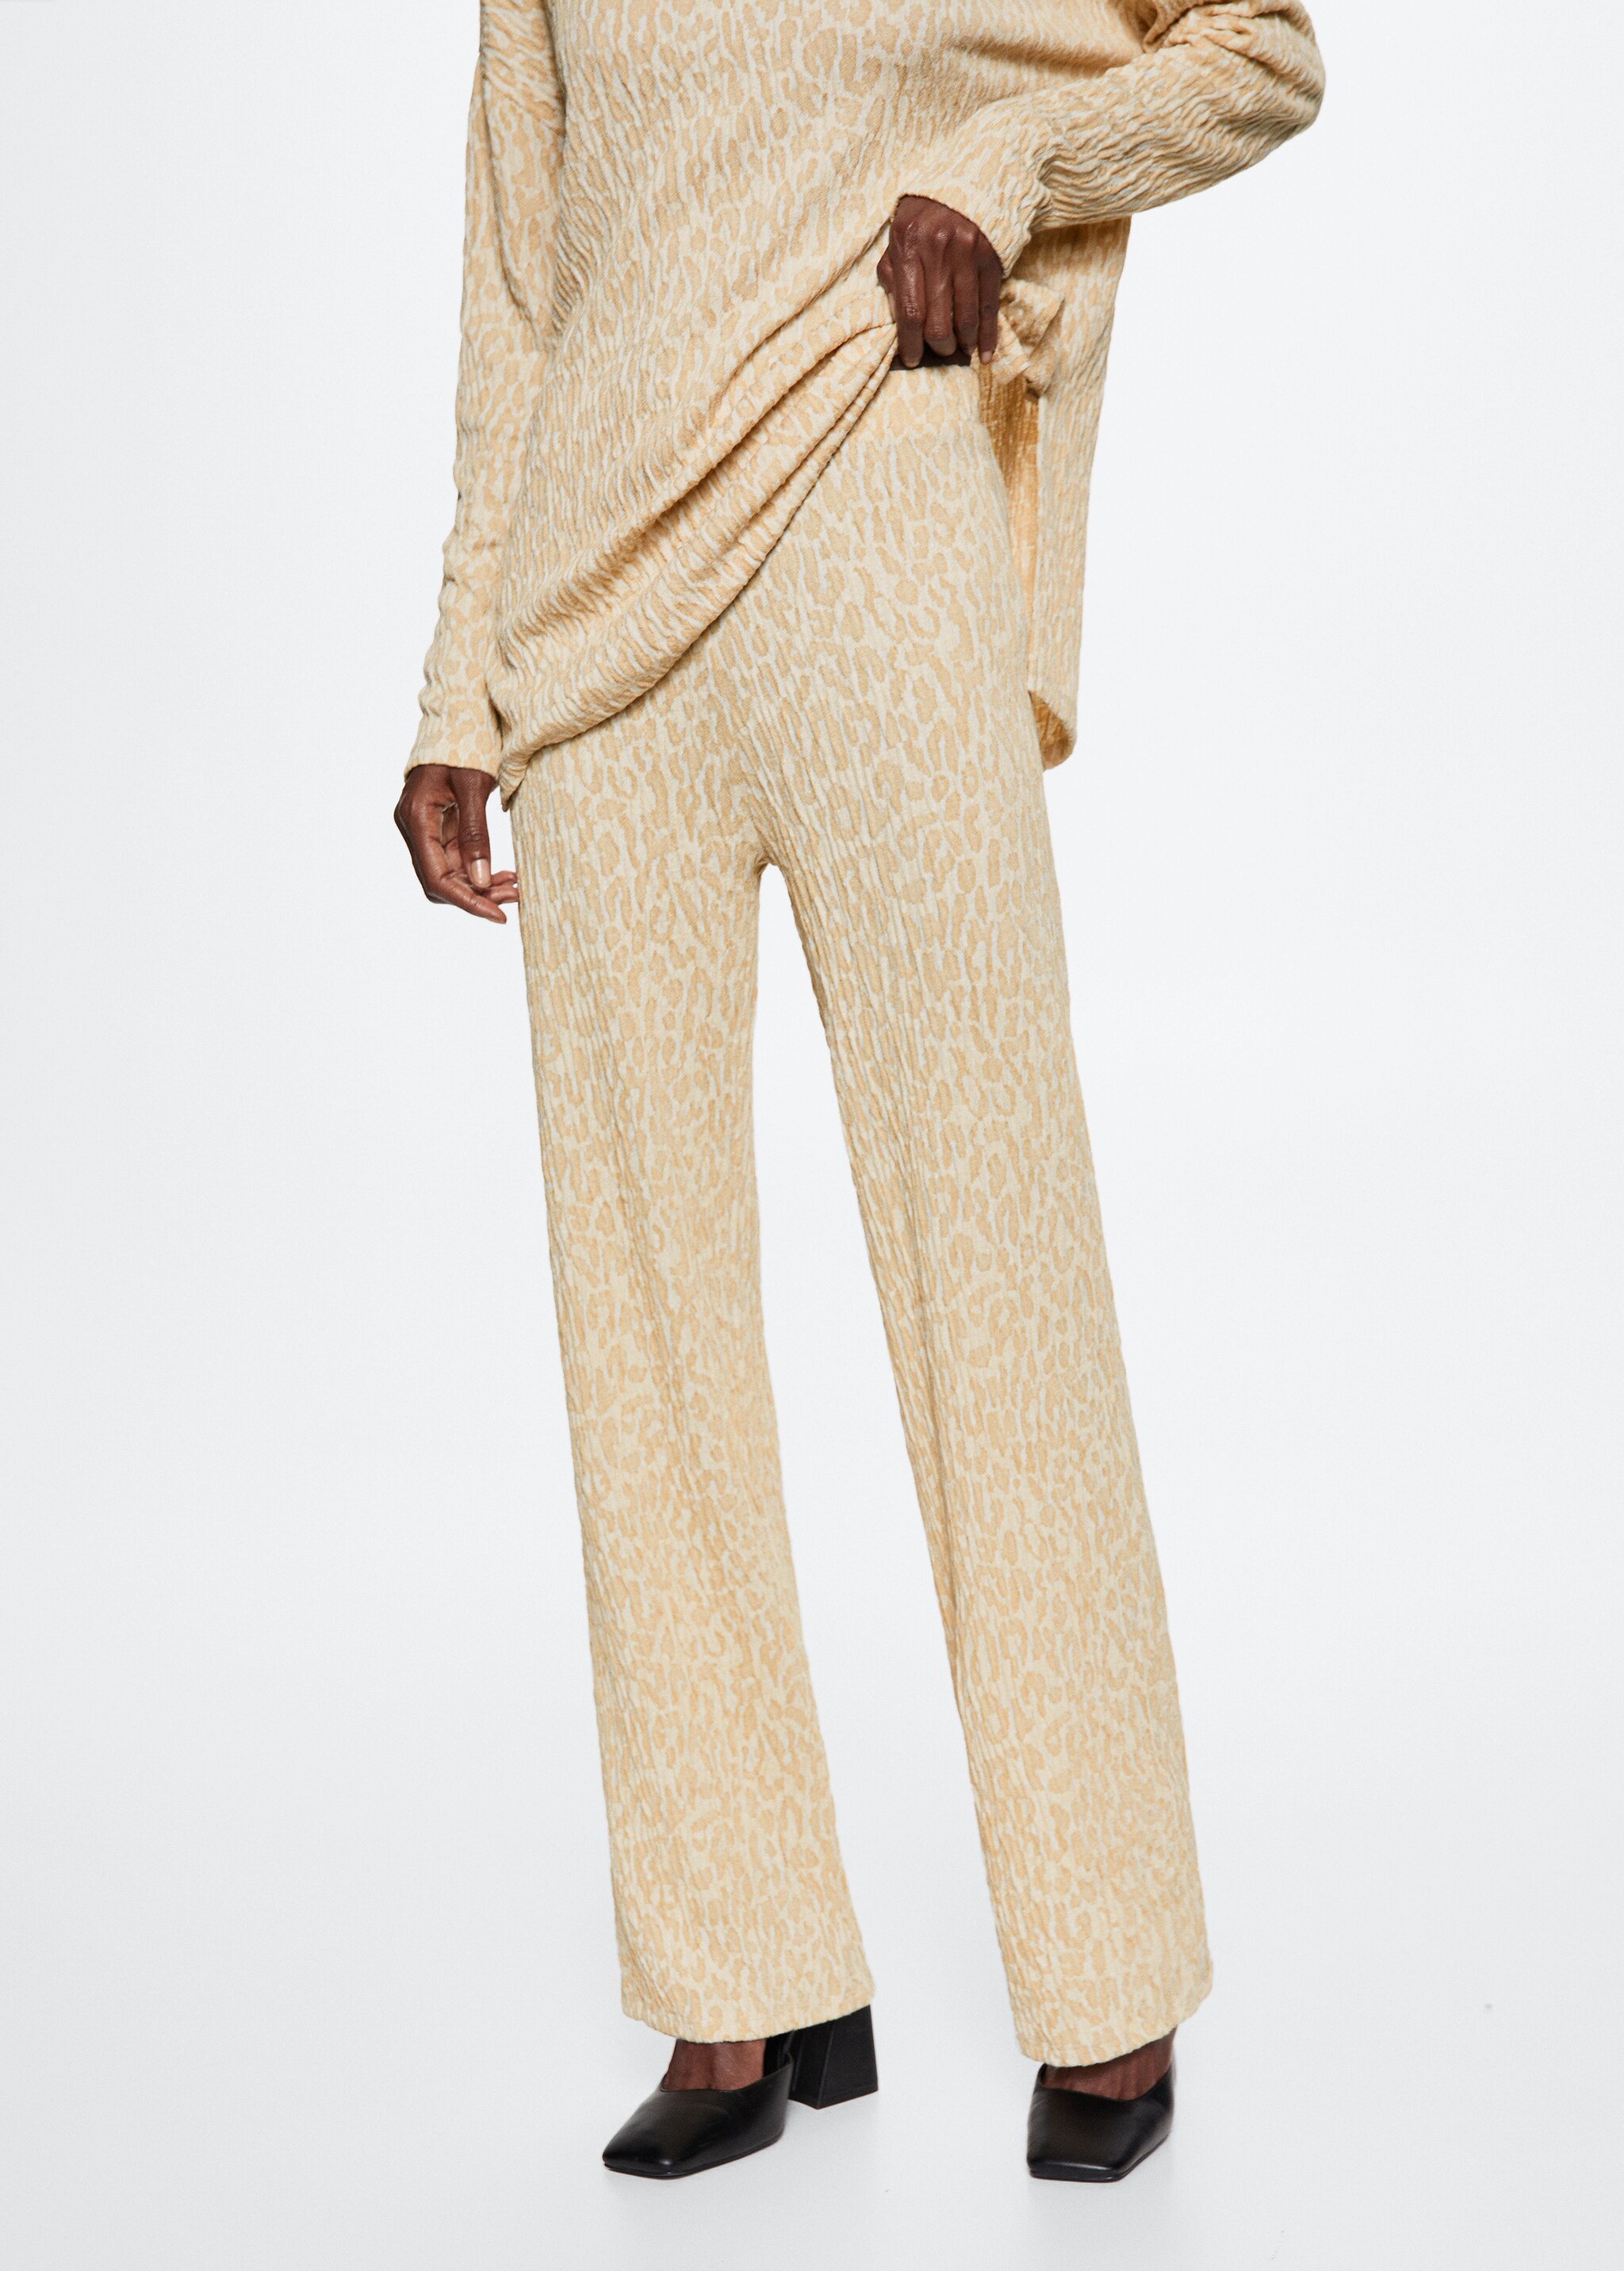 Textured knitted trousers - Medium plane